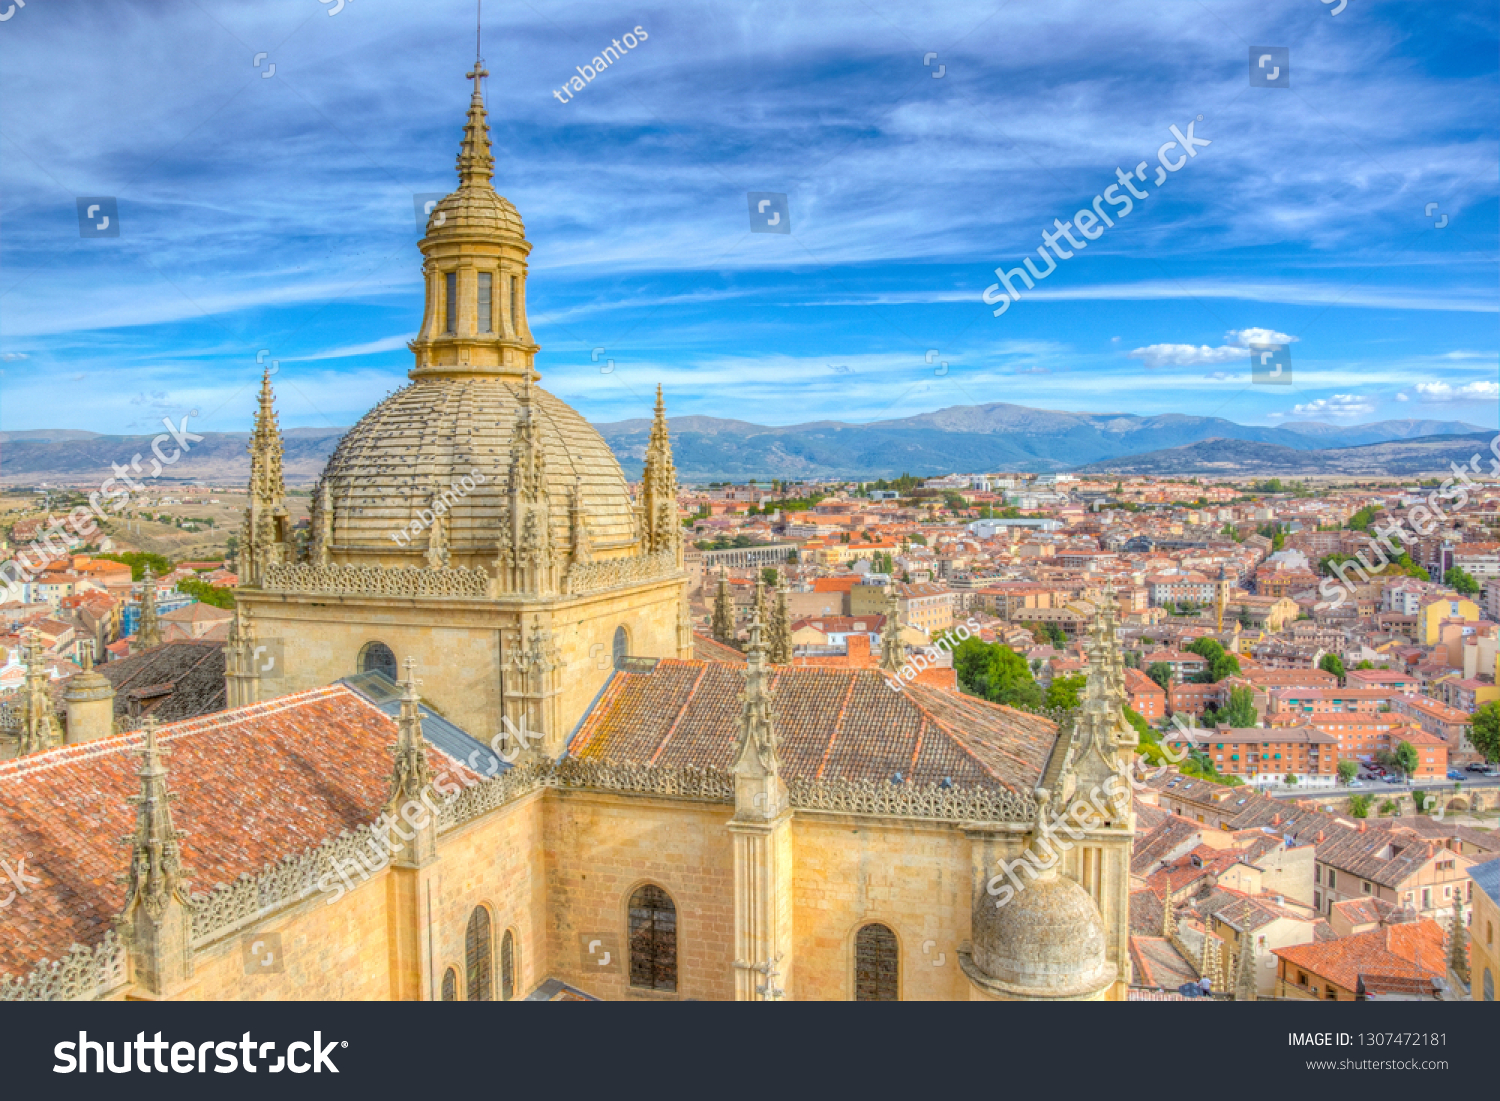  Aerial view of Gothic cathedral at Segovia, Spain
 #1307472181